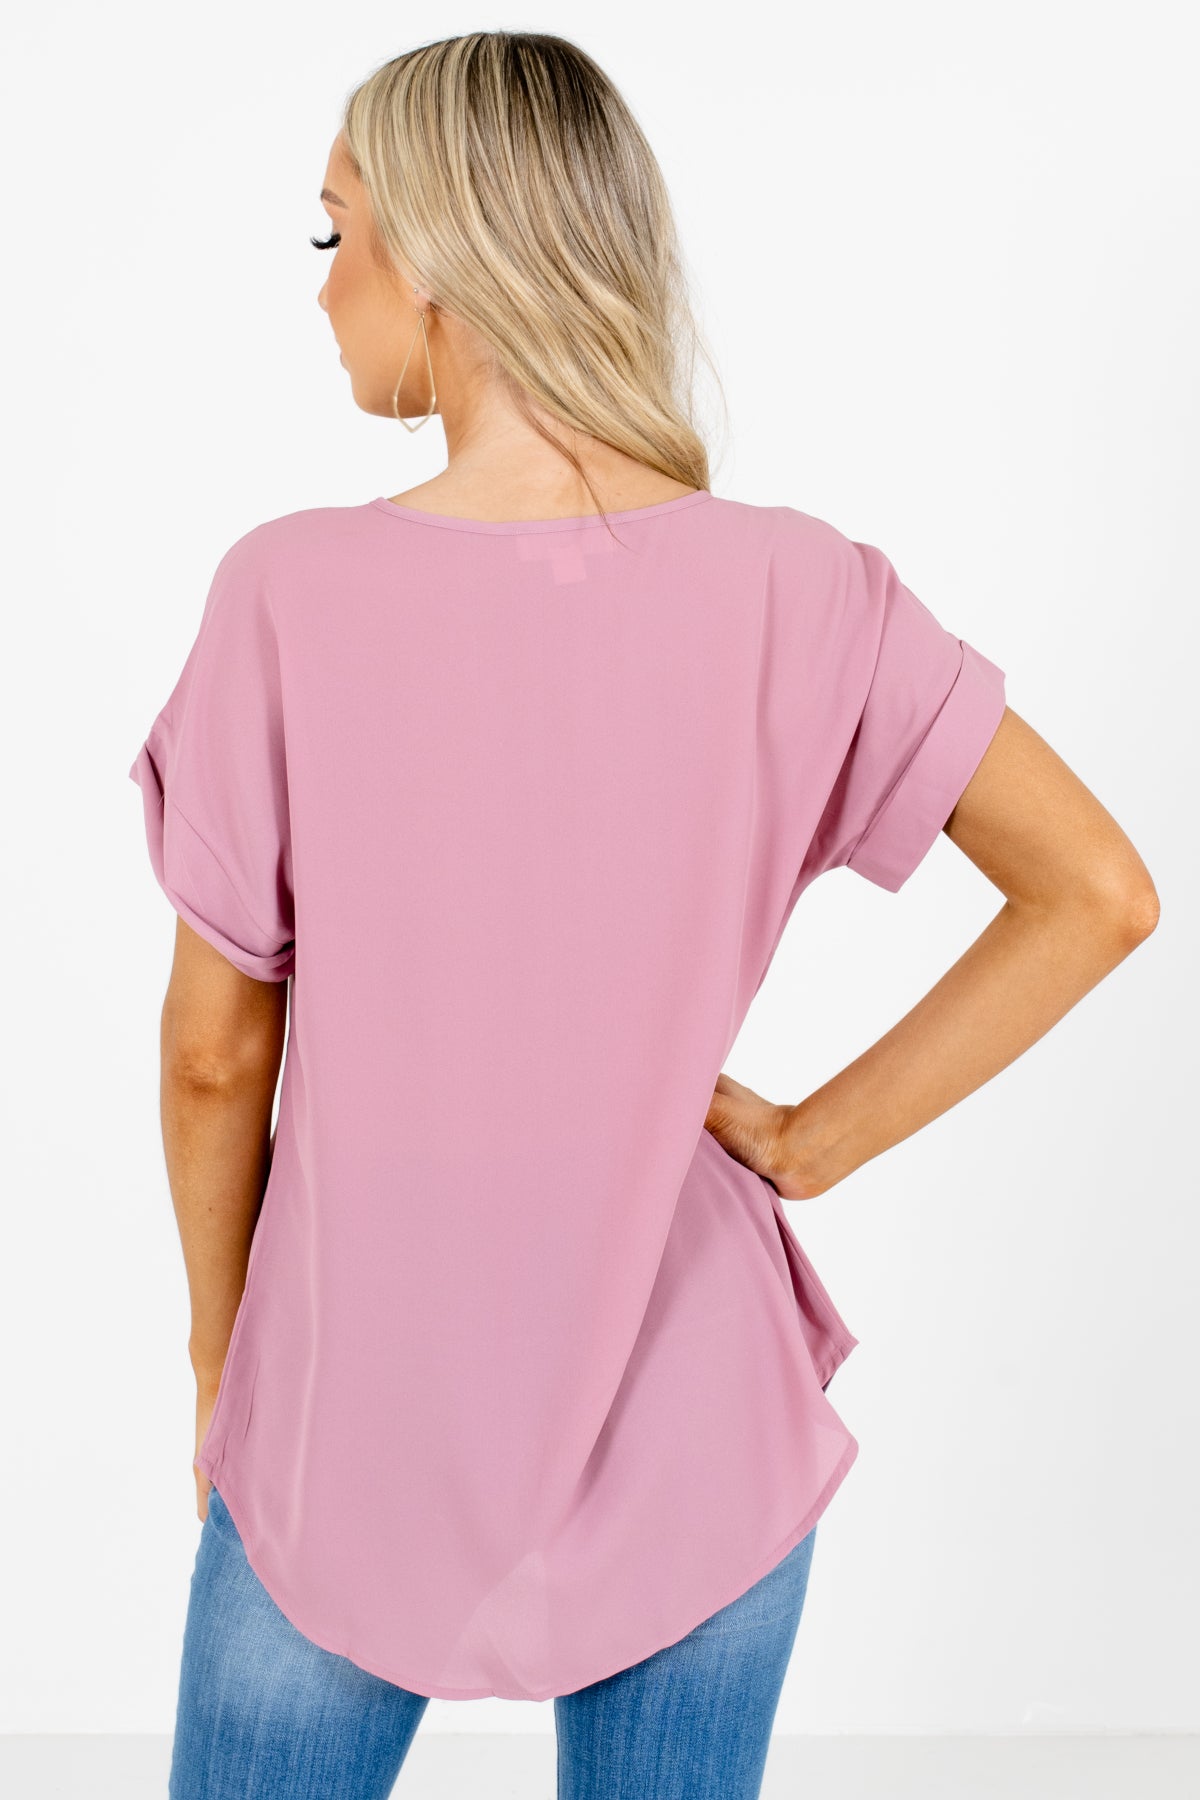 Women's Pink Cuffed Sleeve Boutique Blouse